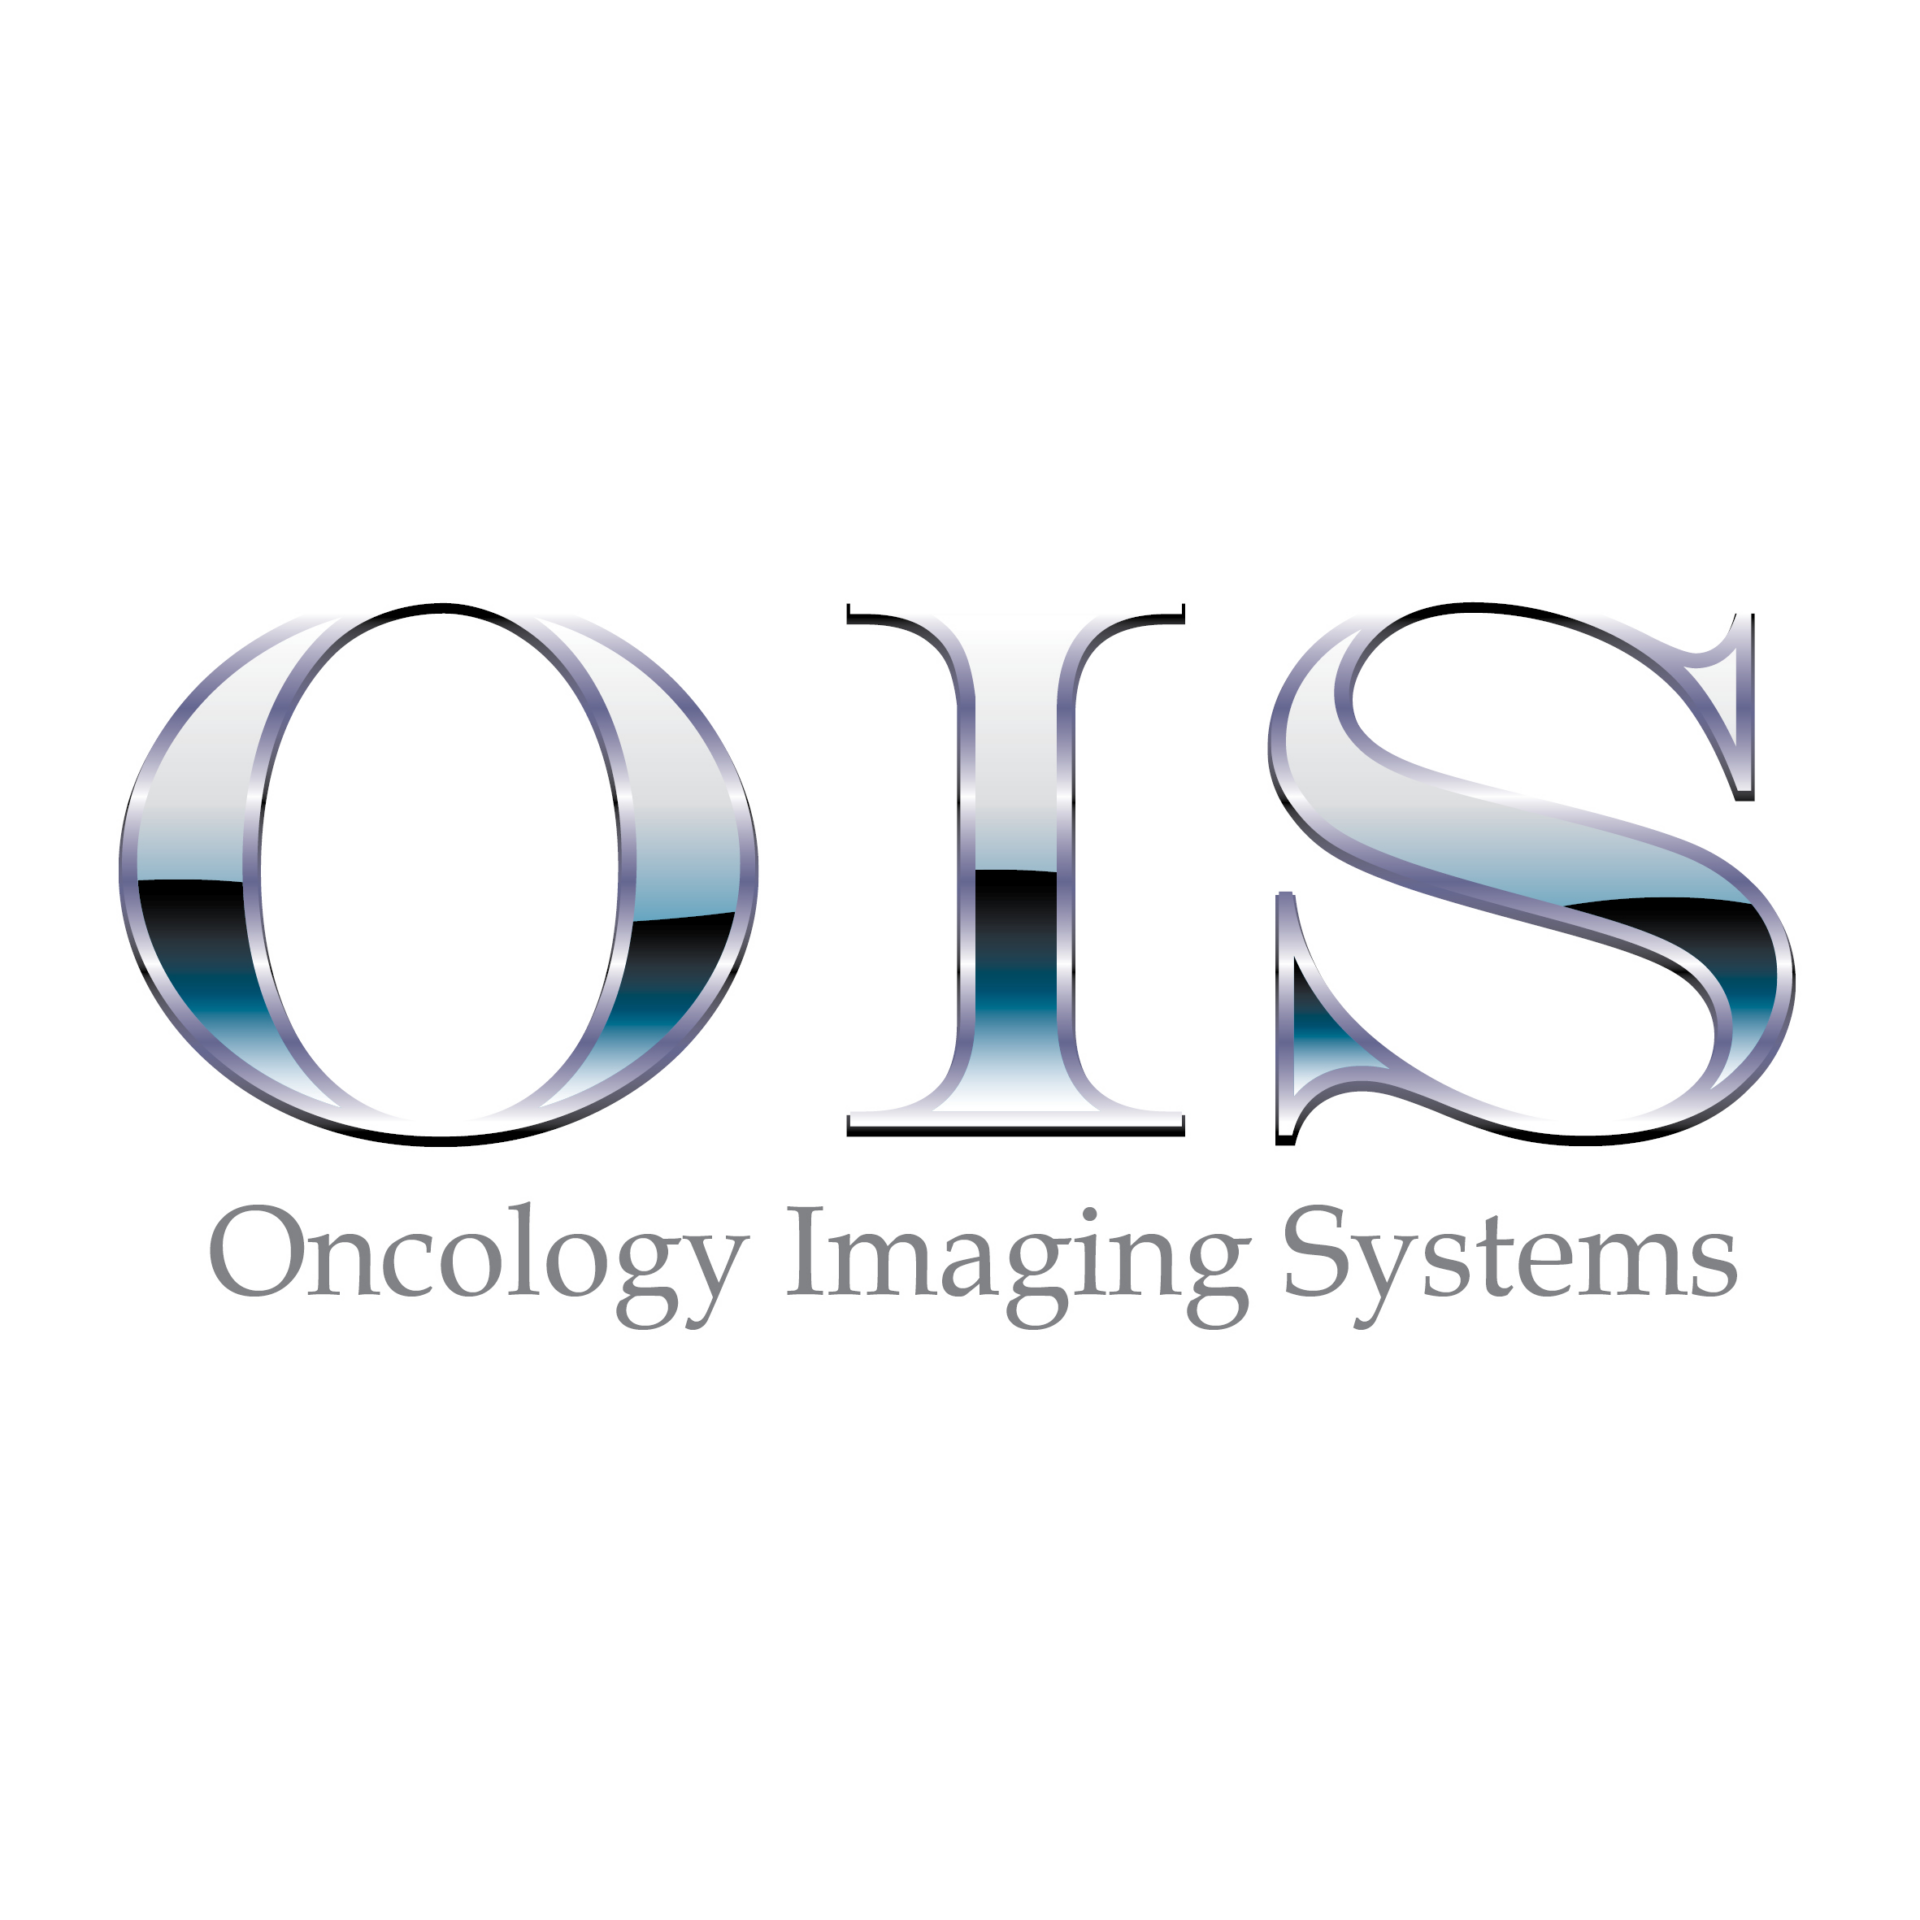 Oncology Imaging Systems Ltd